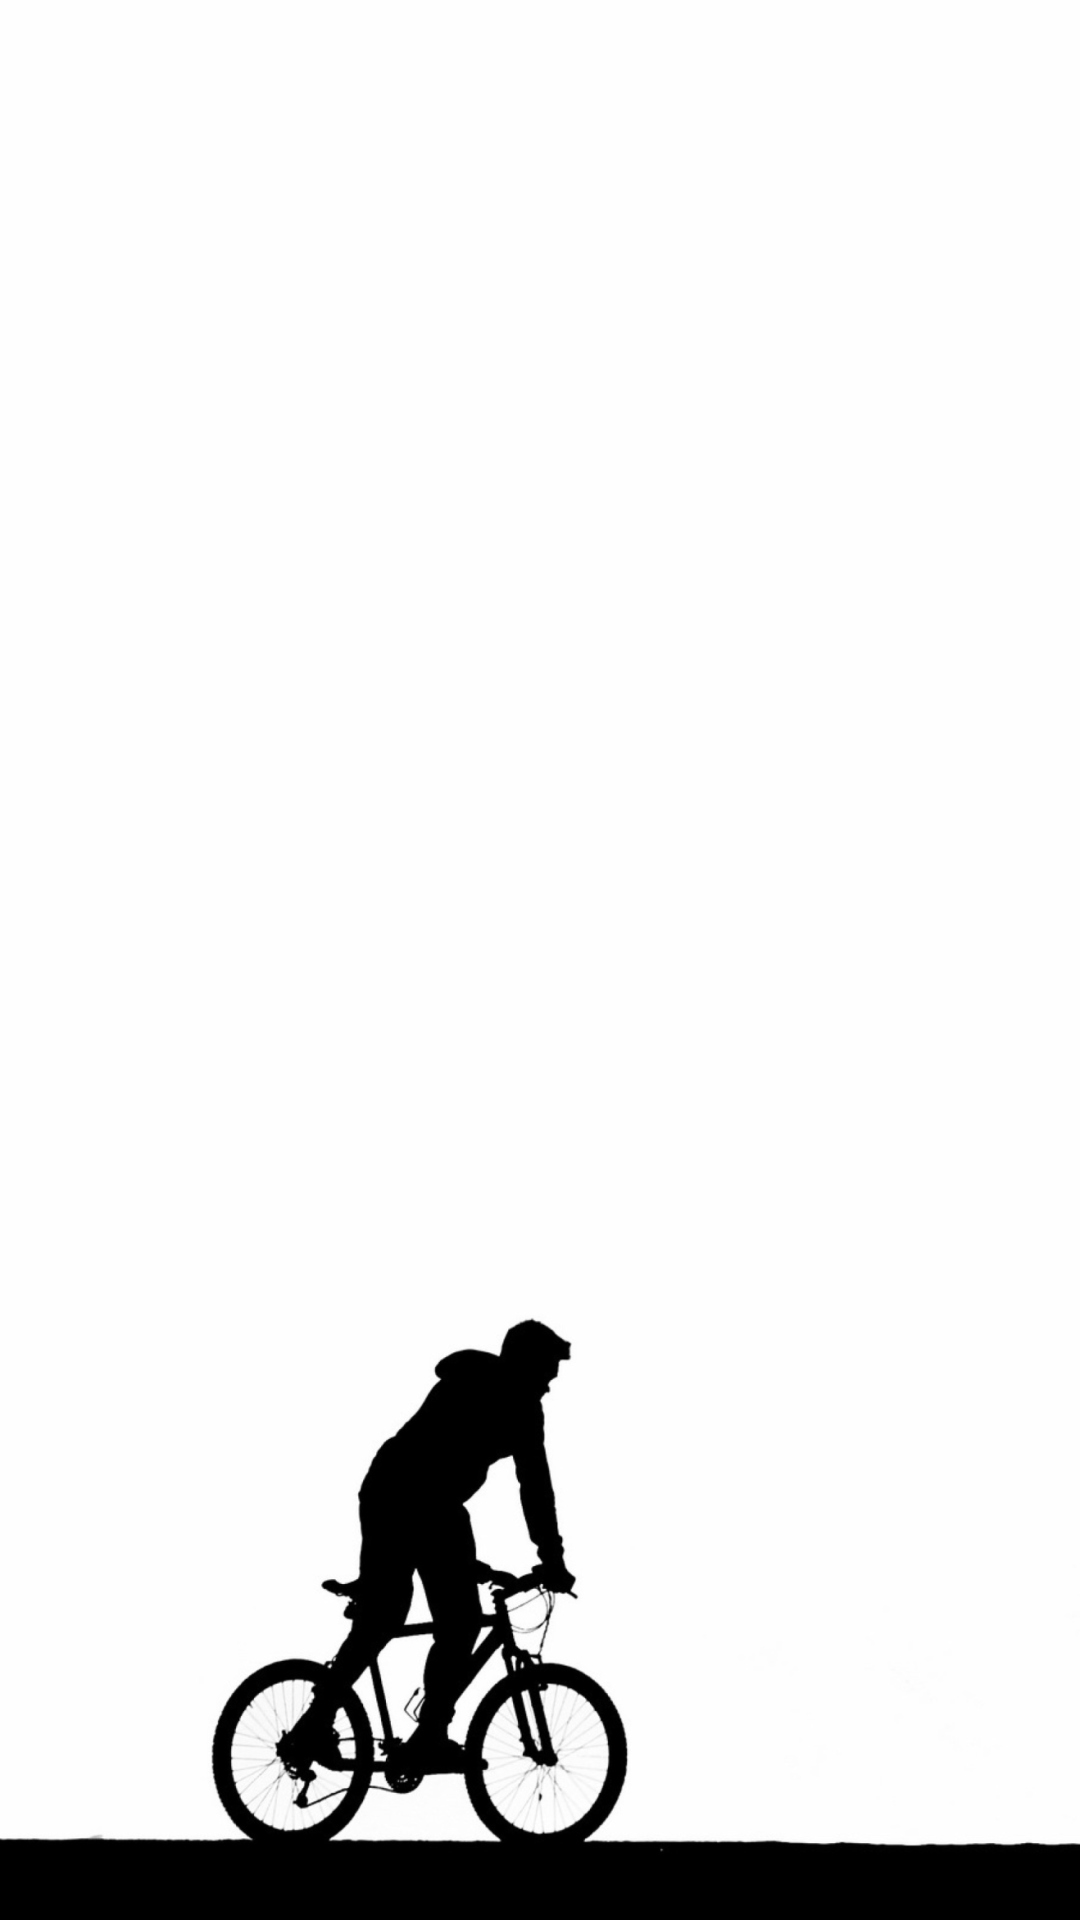 Bicycle Silhouette wallpaper 1080x1920